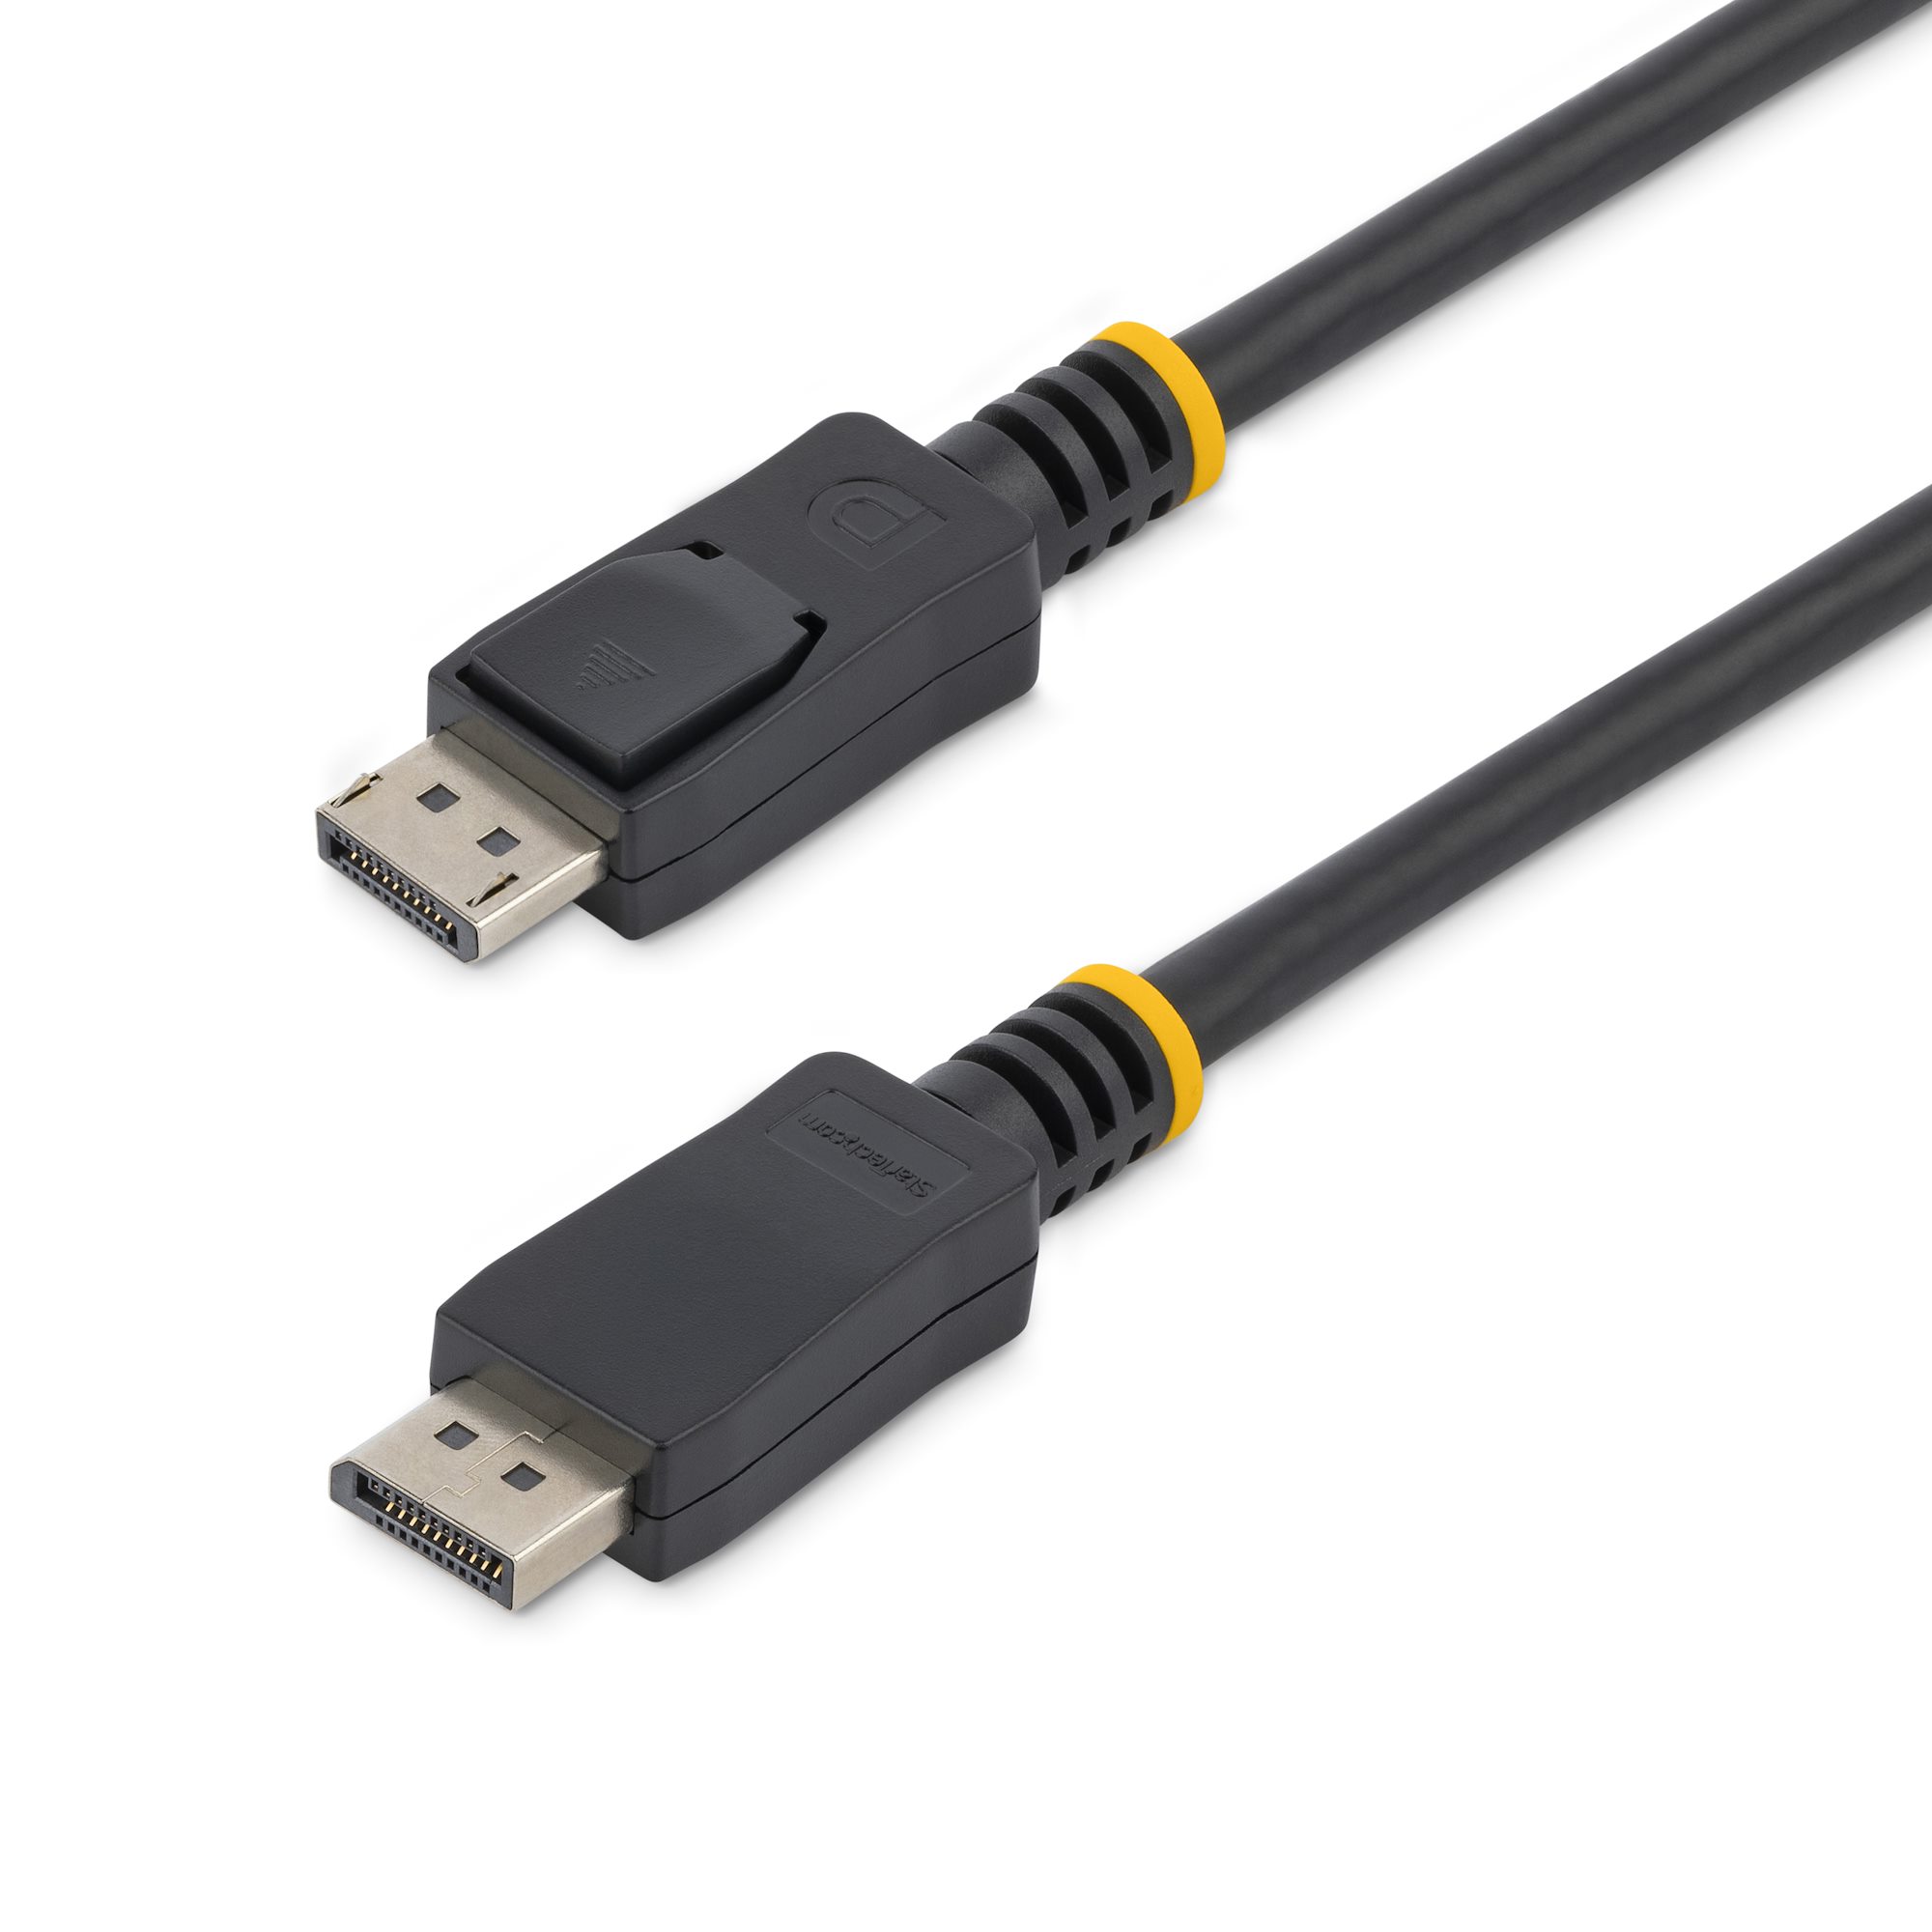 ULTRA DisplayPort Cable E301195. AWM. Style 20276. HDMI Cable. 6 feet long